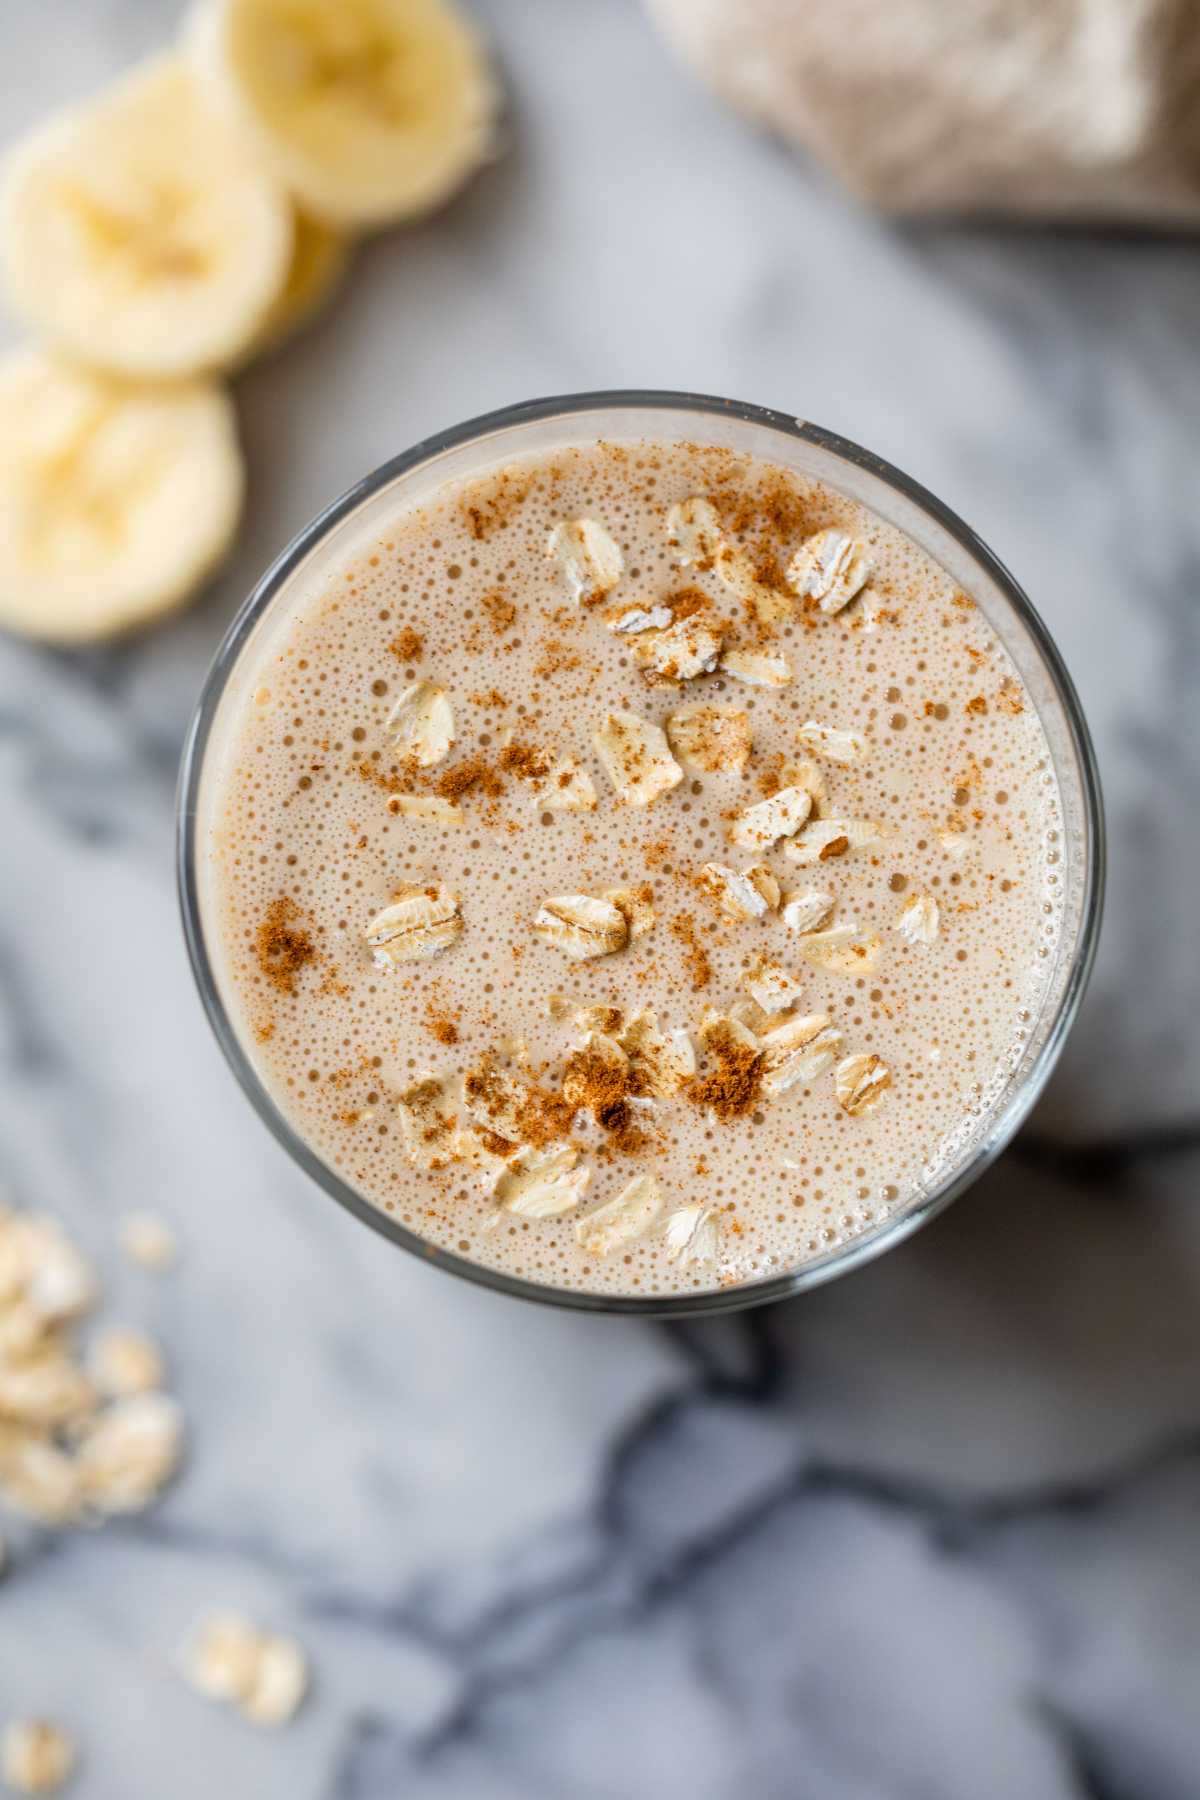 Top view of an oatmeal smoothie topped with a sprinkle of oats and cinnamon.